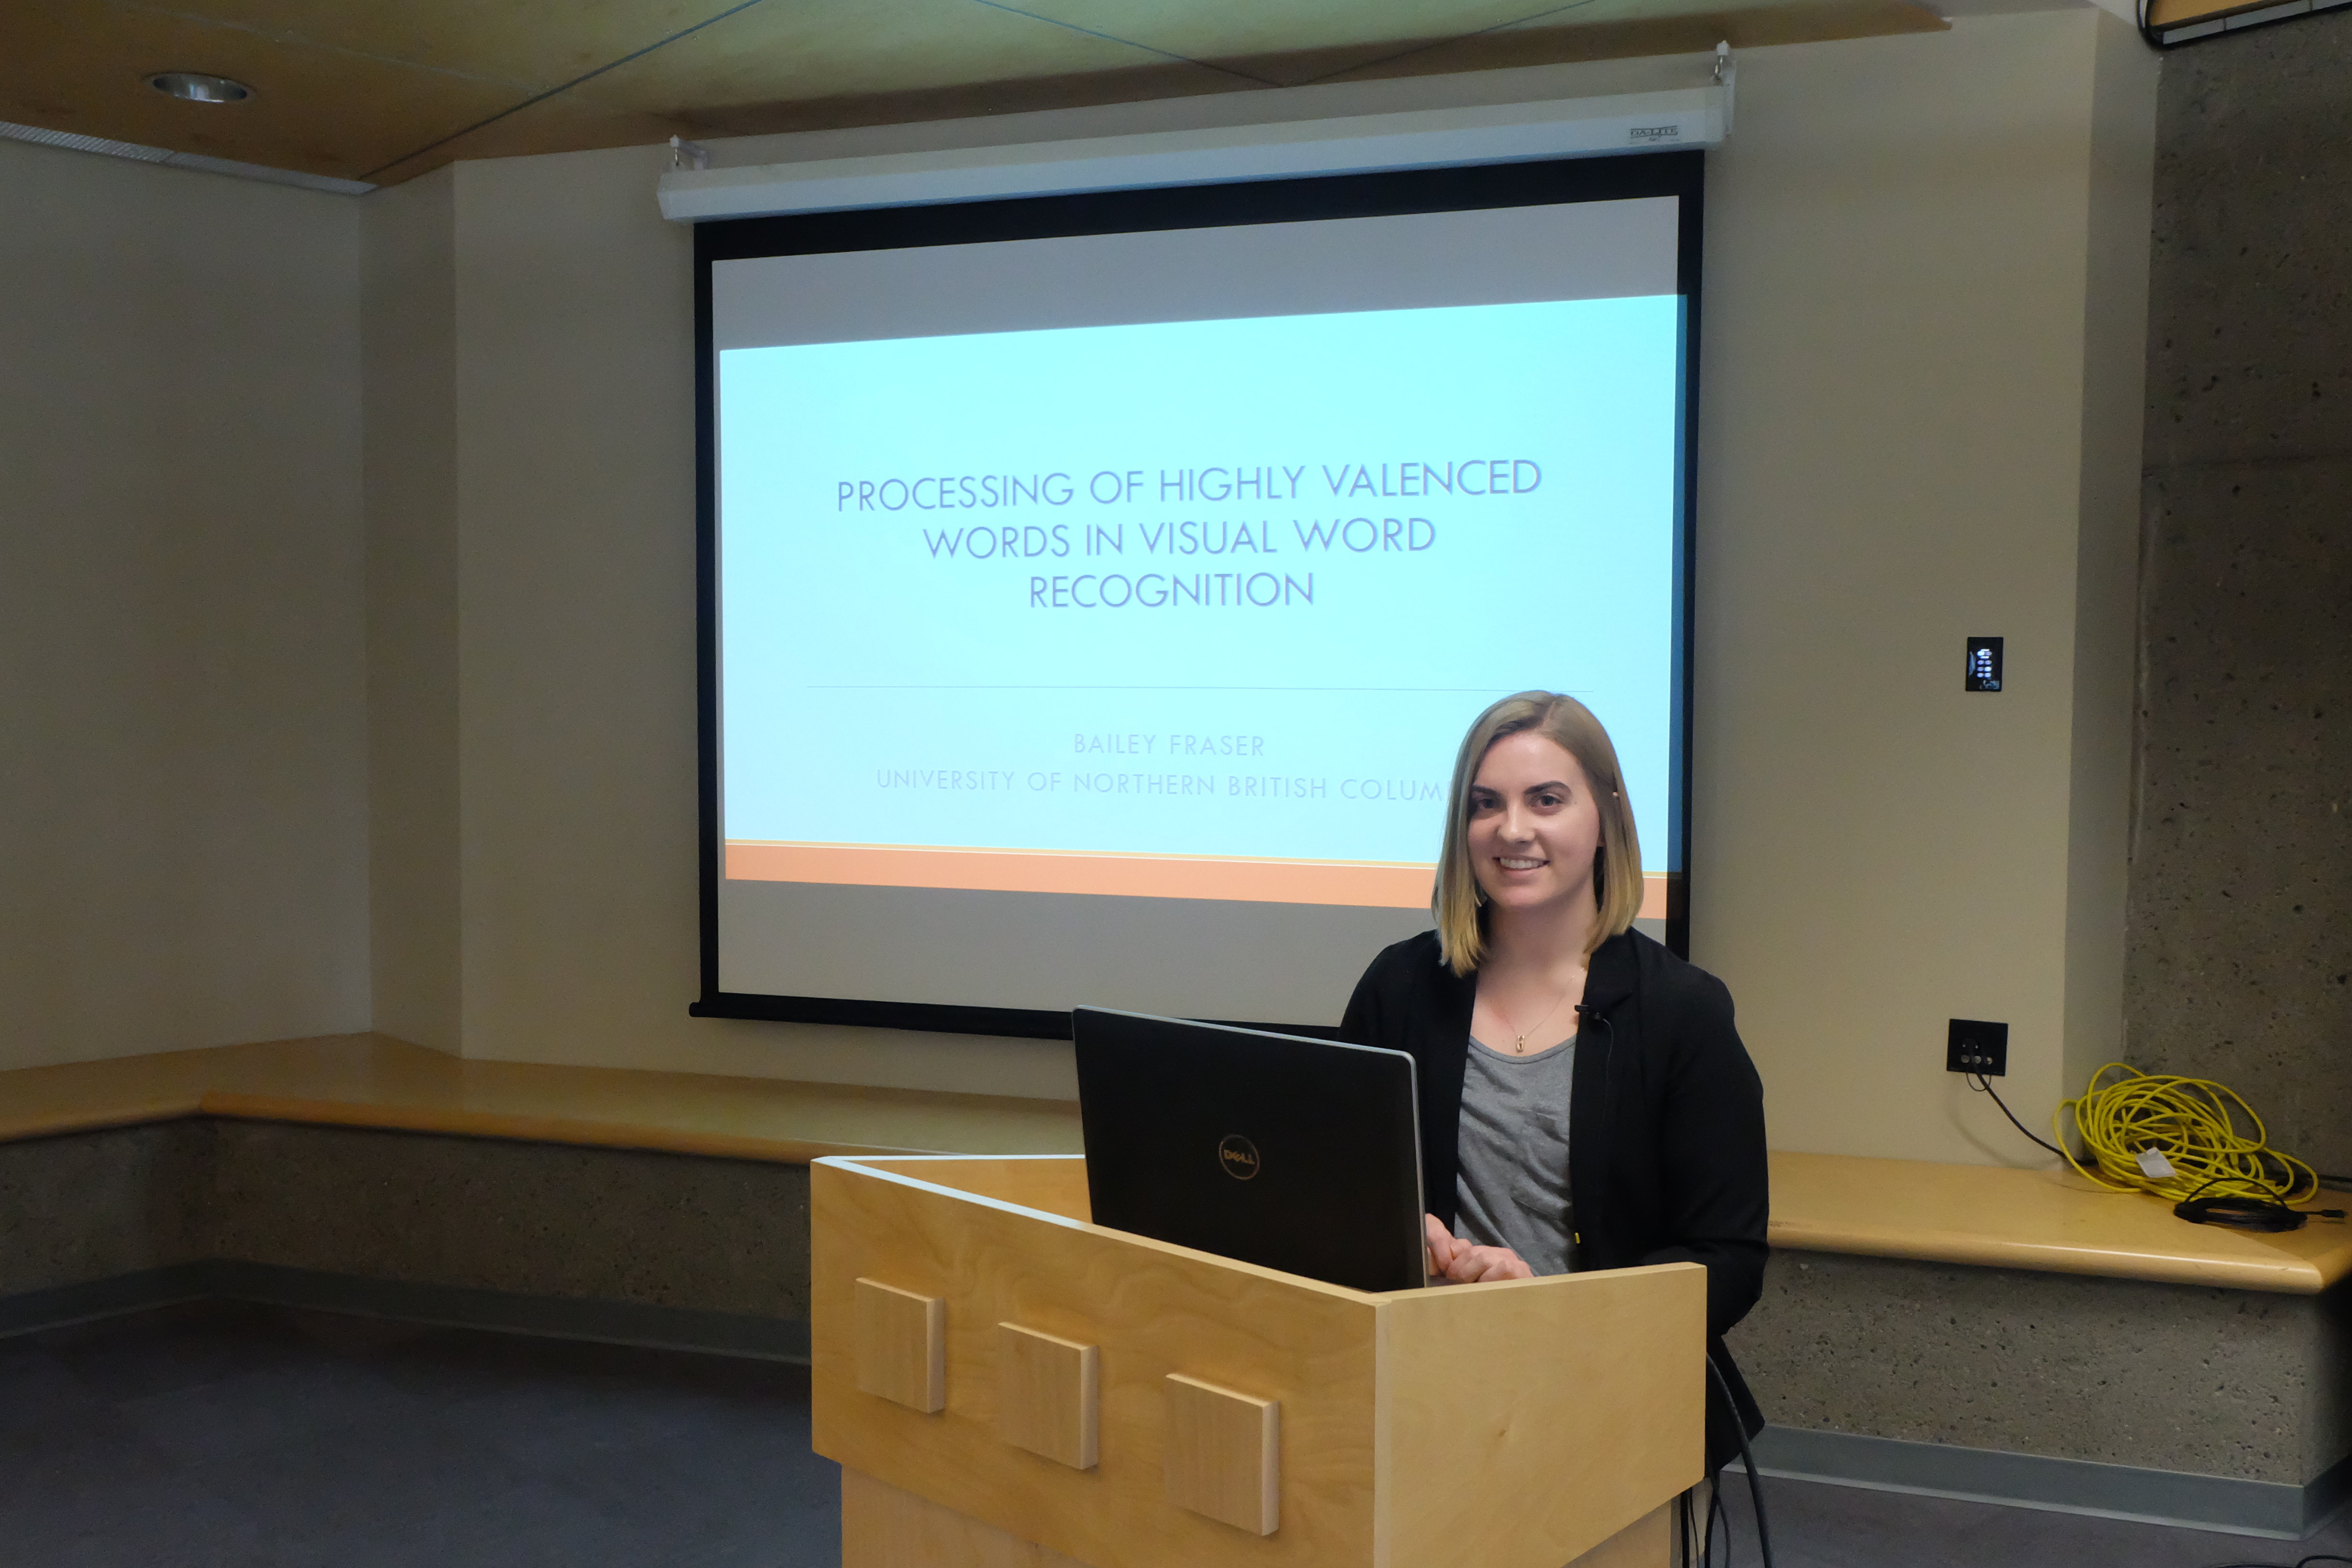 Bailey Fraser: Processing of highly valenced words in visual word recognition